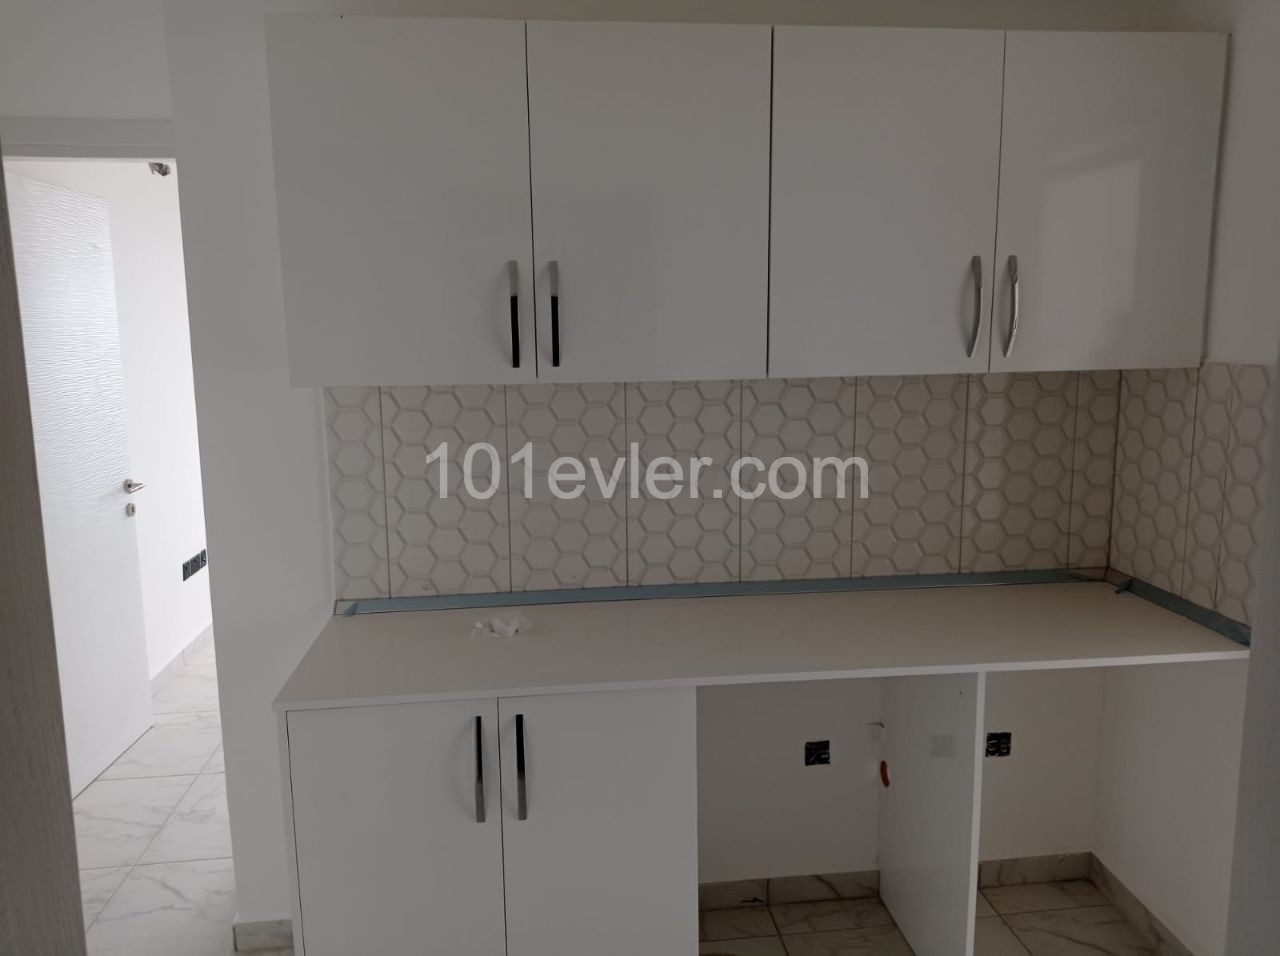 NEW FINISHED WONDERFUL (2+1) 80M2 TURKISH FLATS IN GÖNYELİ READY OF COIN AND LOAN ** 